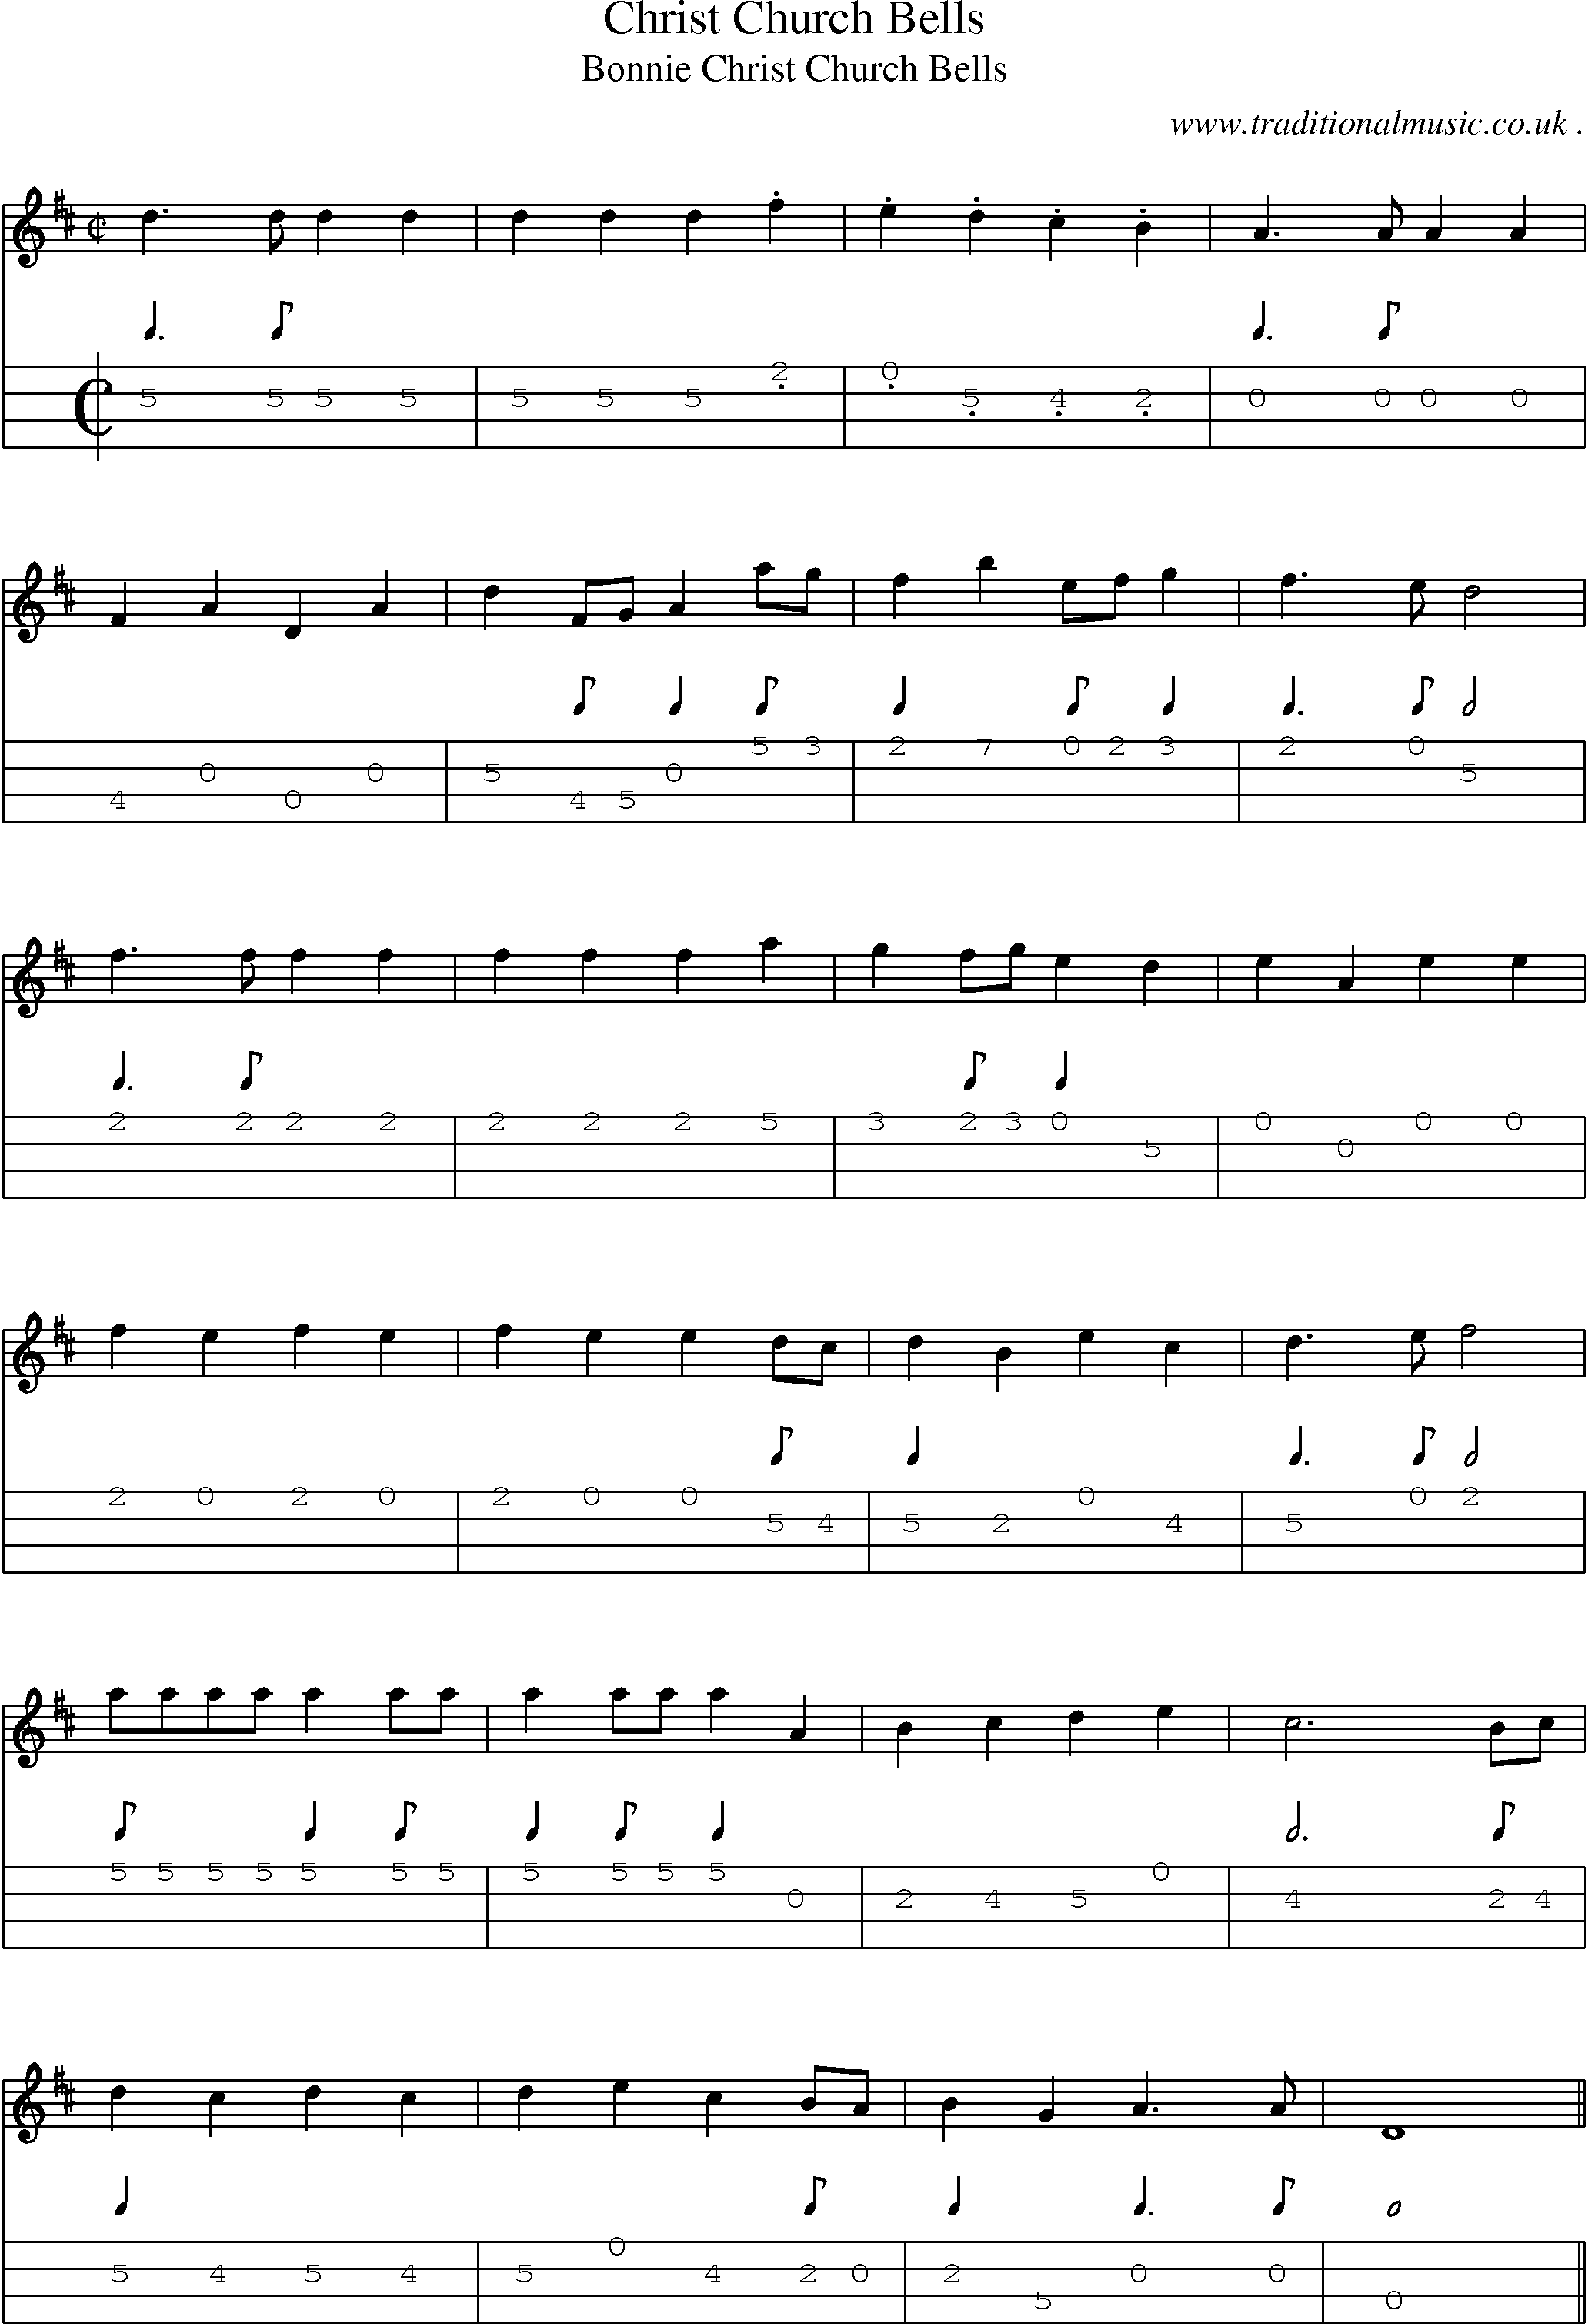 Sheet-Music and Mandolin Tabs for Christ Church Bells